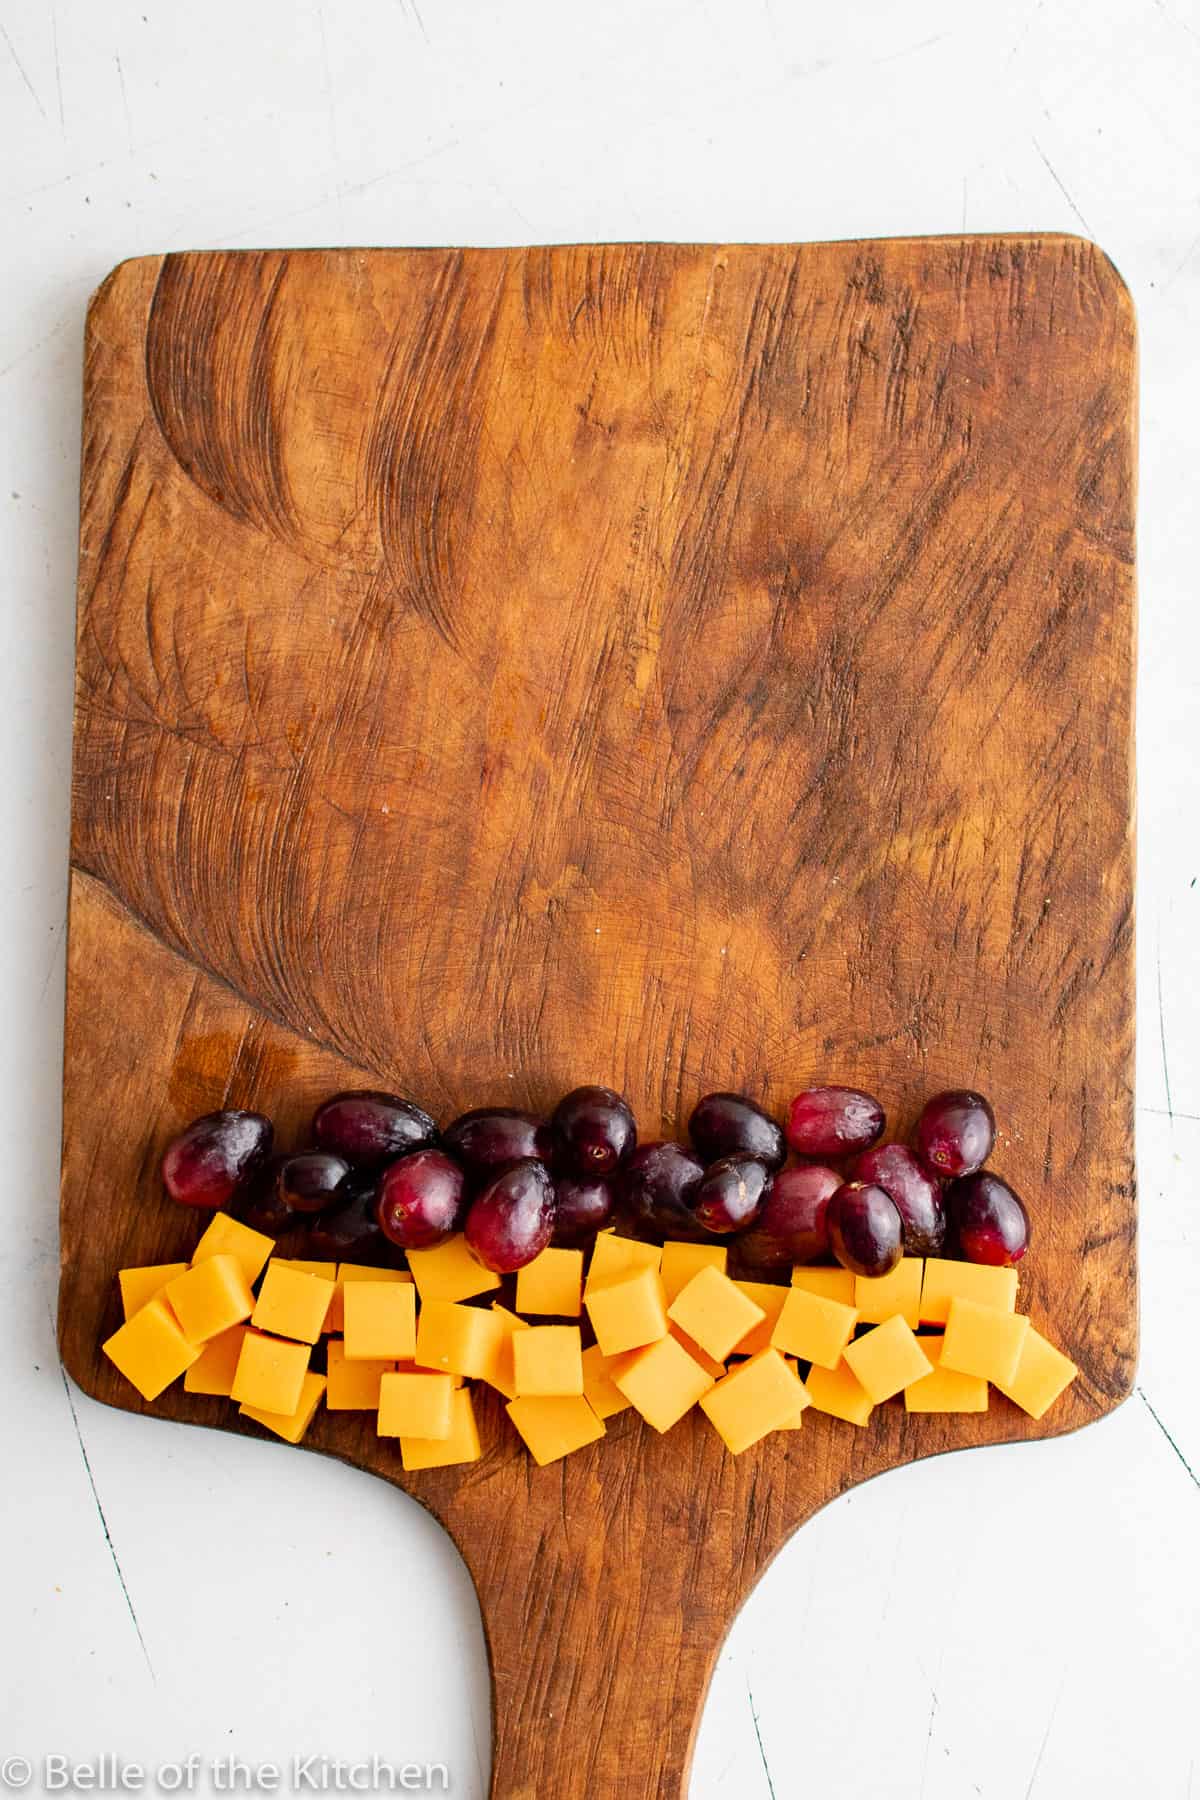 cut up cheese cubes and grapes on a wooden cutting board.